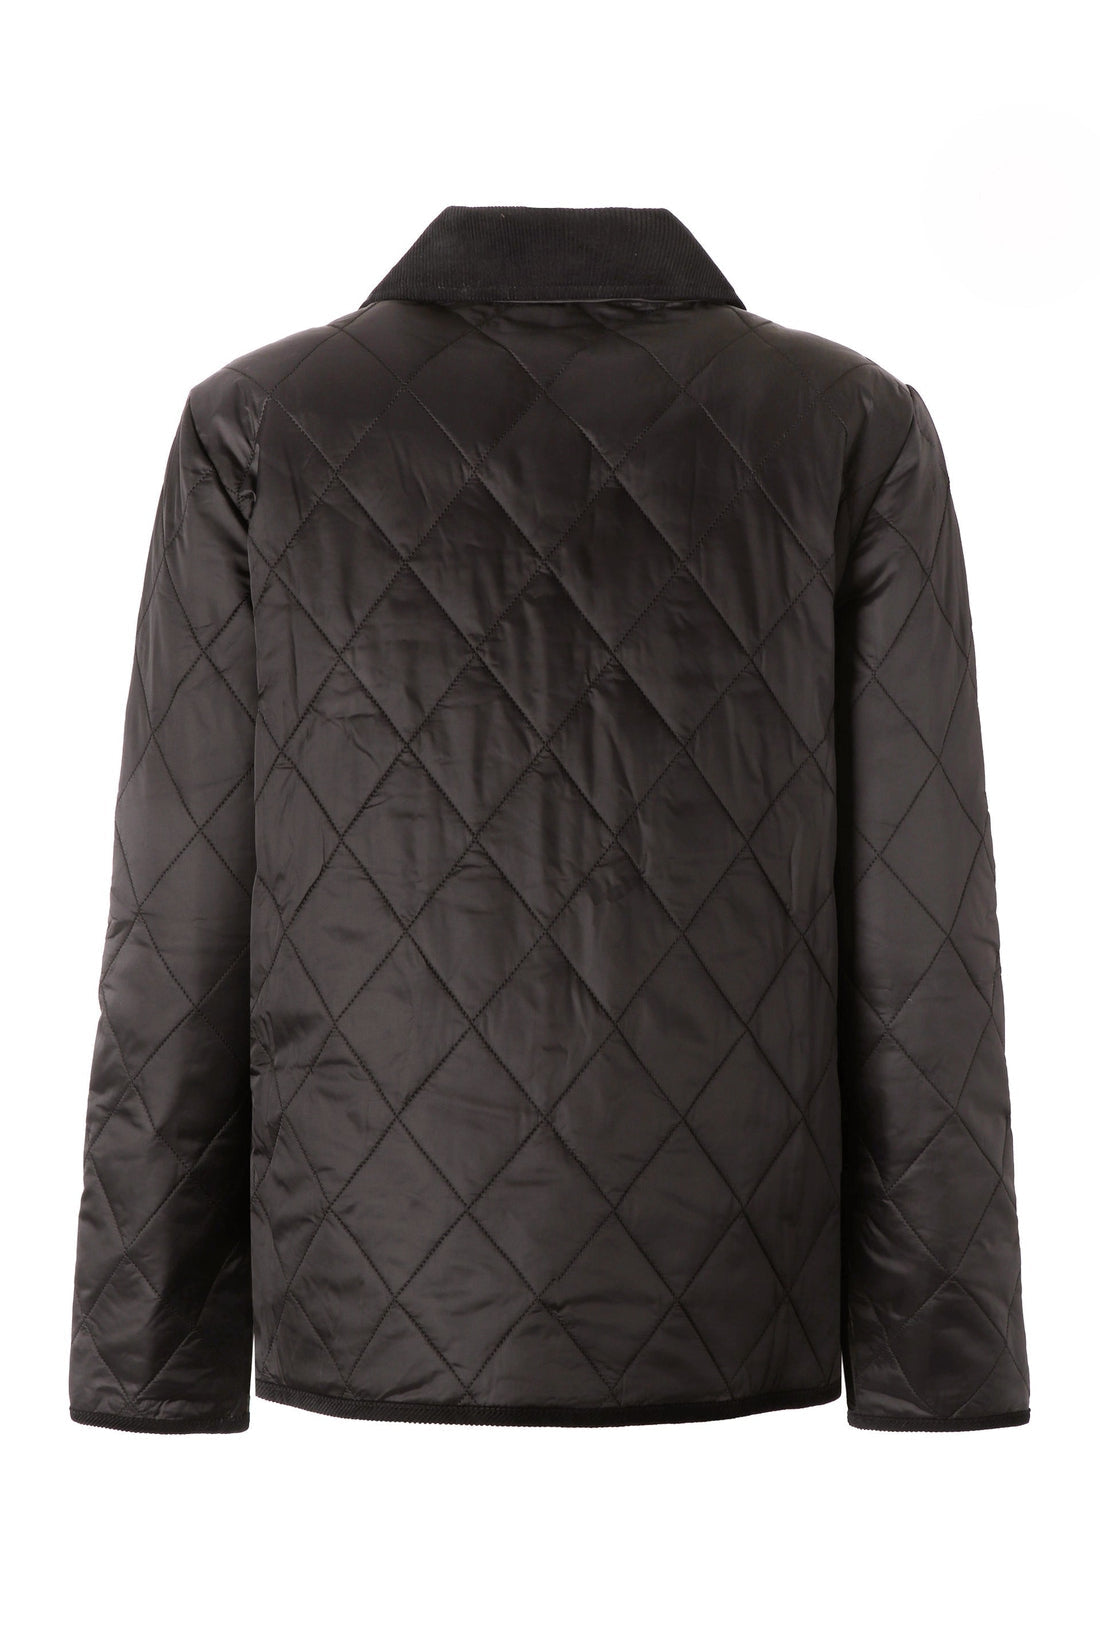 Barbour-OUTLET-SALE-Barbour Clydebank quilted jacket-ARCHIVIST